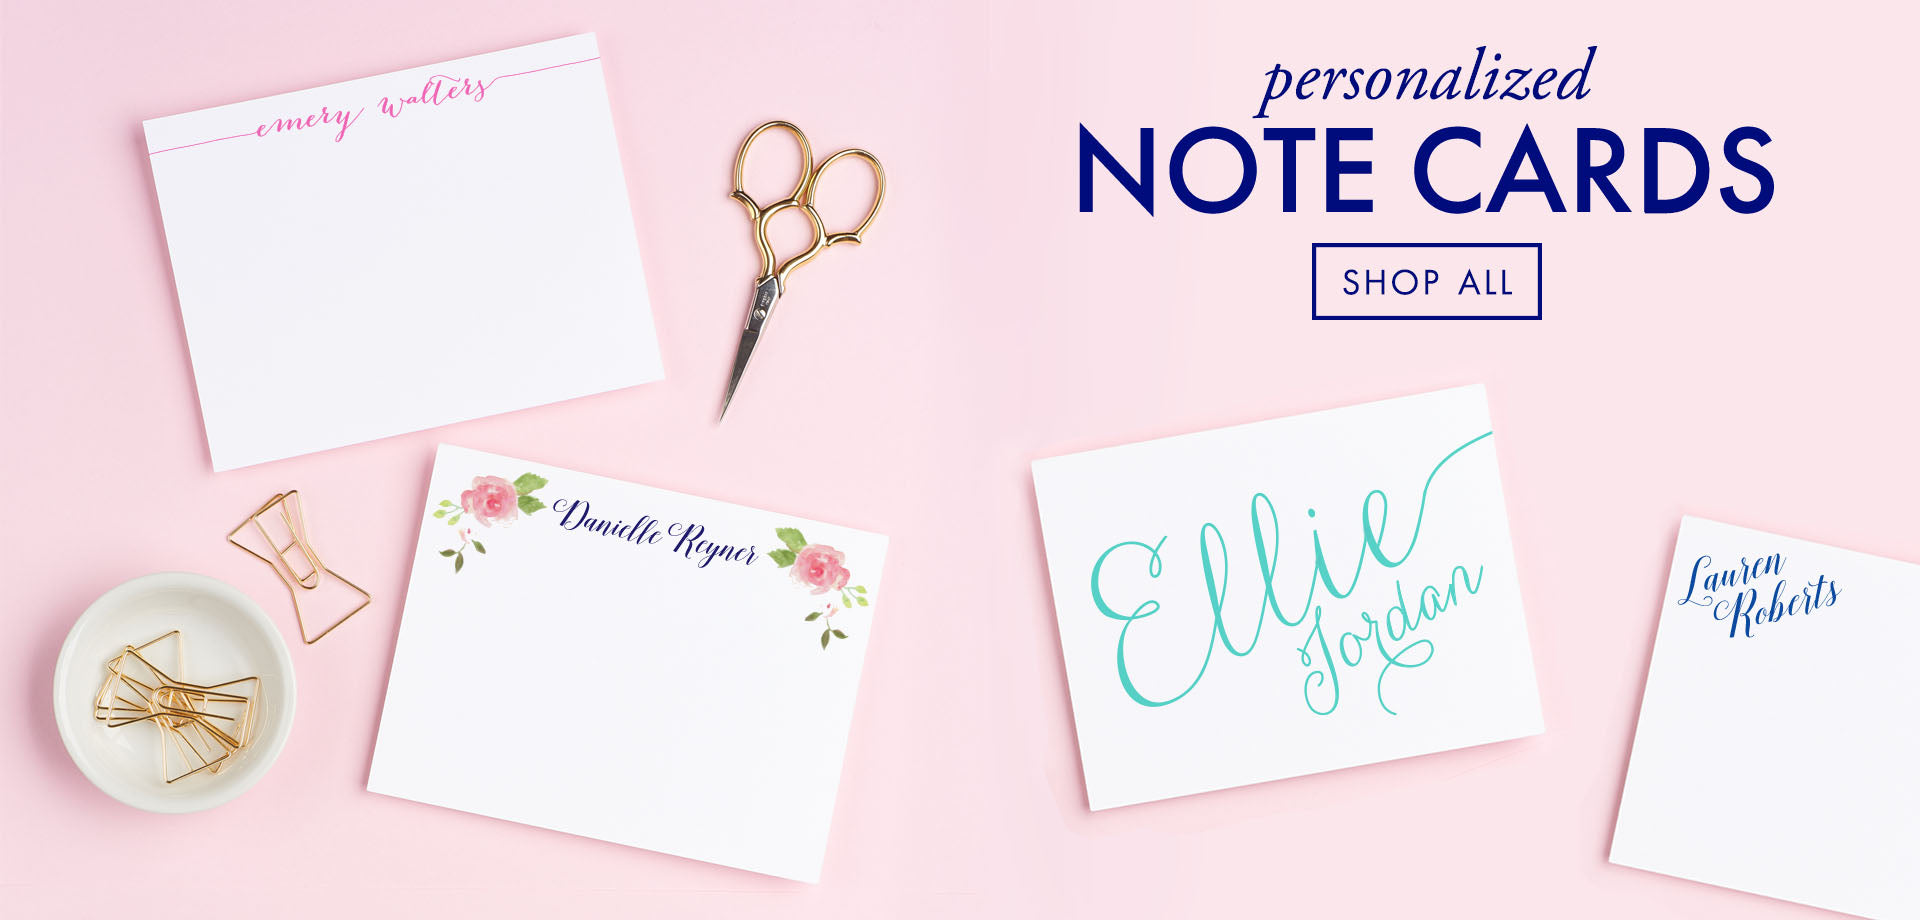 Personalized Note Cards, Shop all styles on Modern Pink Paper